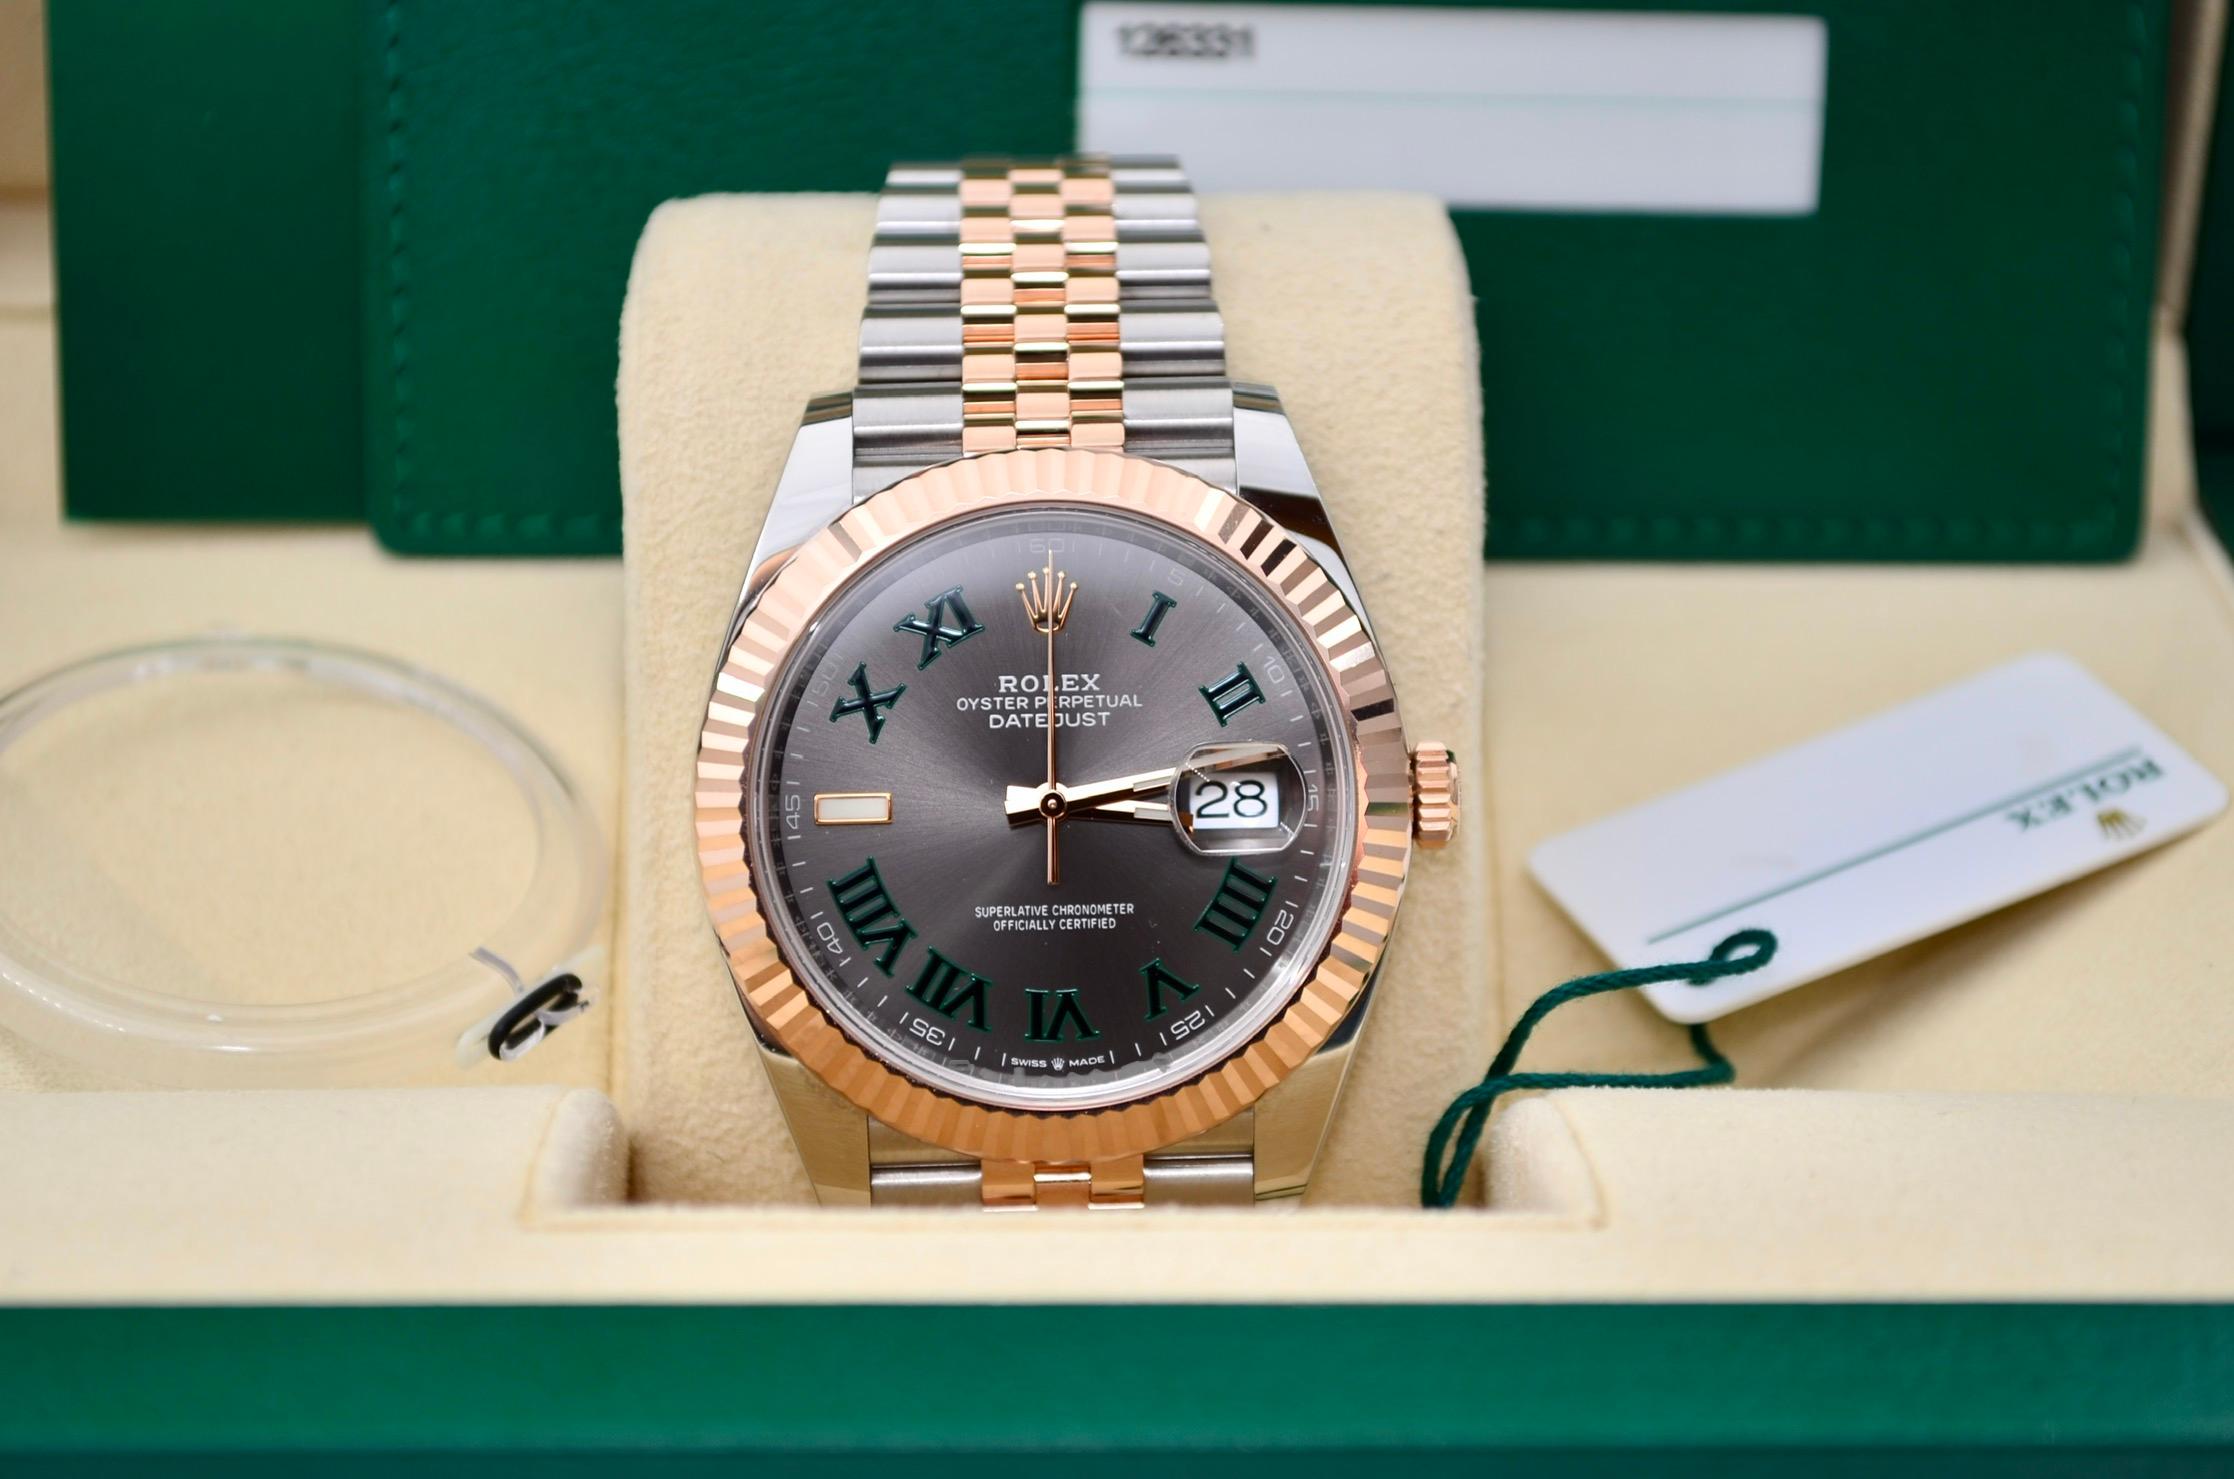 The watch is in a very good condition and it’s working well. It shows slight signs of wear. The watch comes with the original box and documents. Manufacturer warranty is valid until 2024. The Rolex Datejust 41 Wimbledon Rose Gold & Steel Full Set